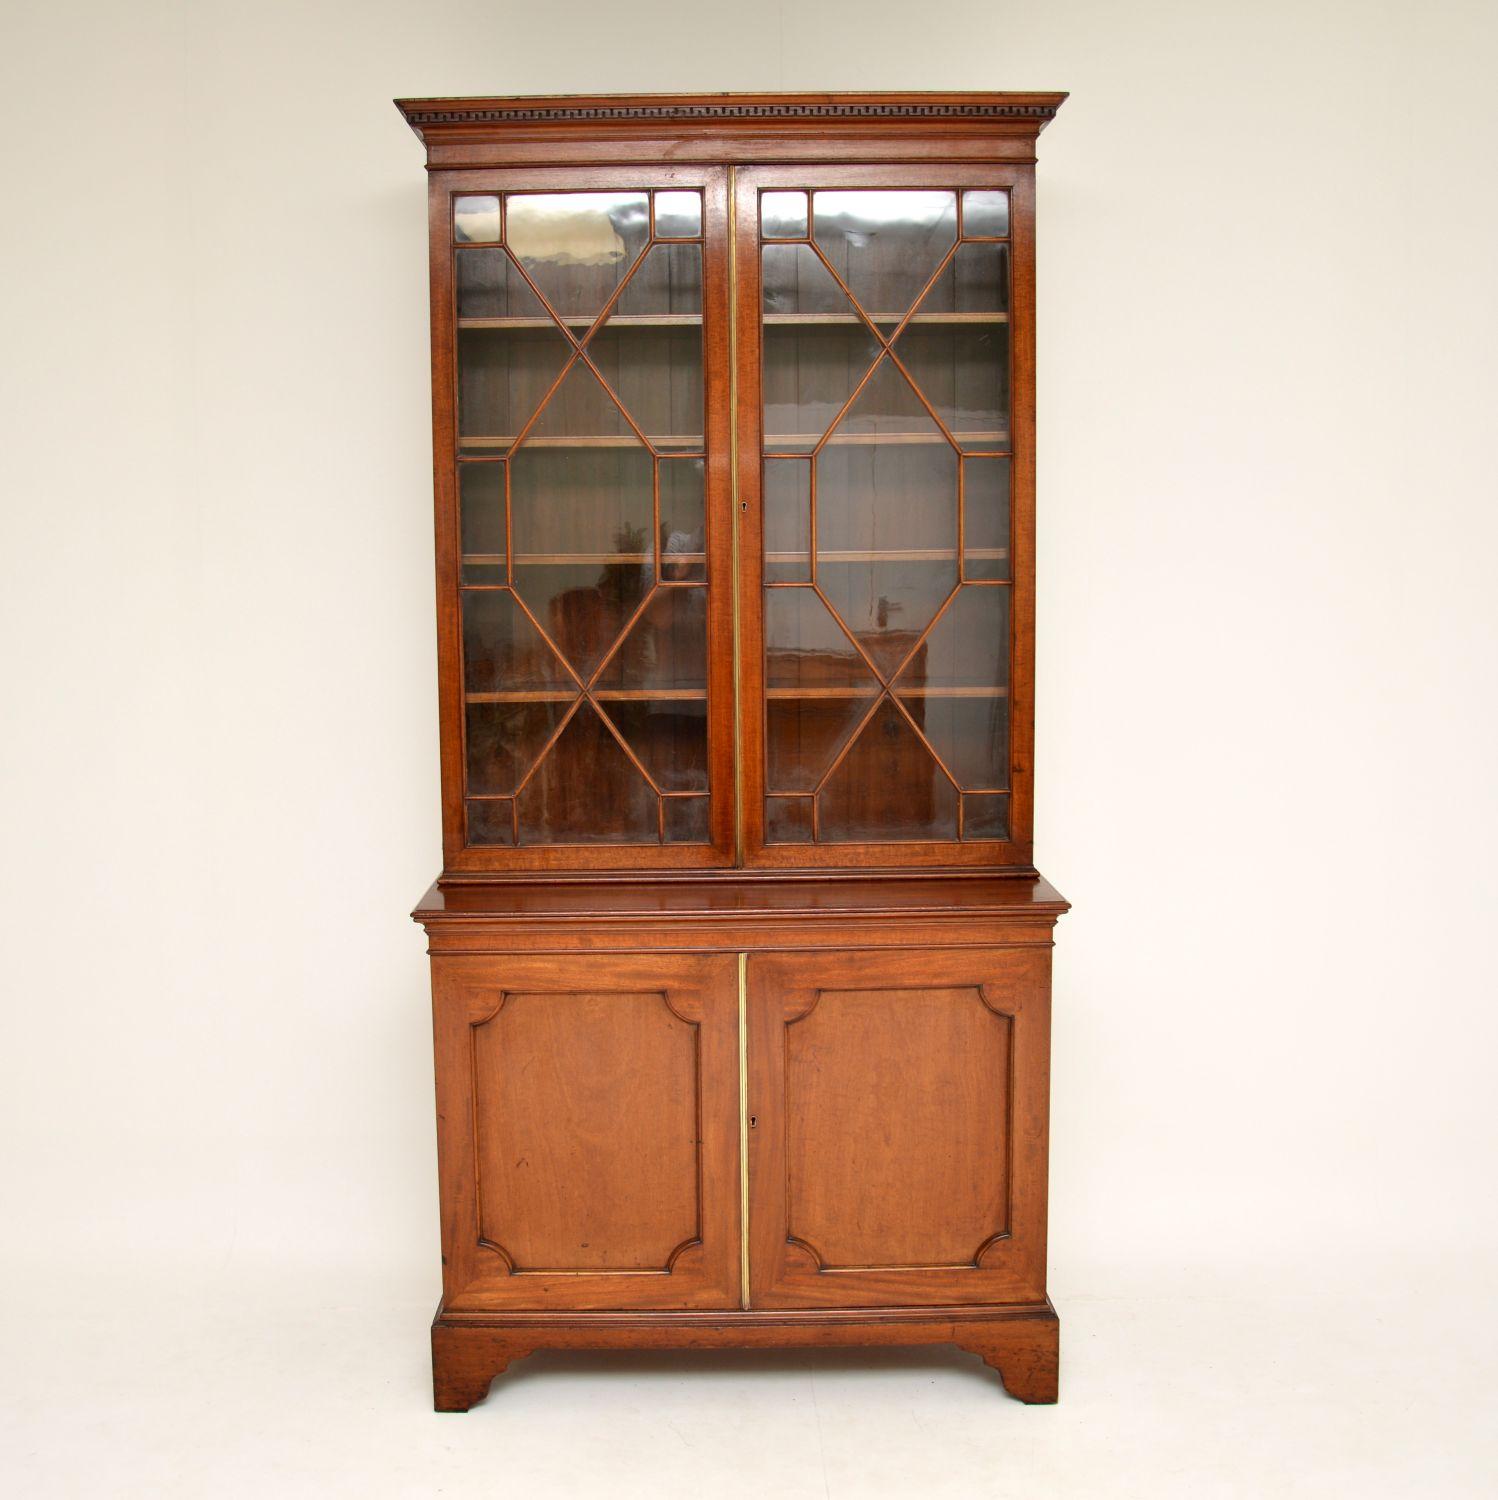 This antique George III period mahogany library bookcase is in excellent original condition and has had no repairs, just a polish. It’s also free from any splits, warps or woodworm and is of high quality.

The top cornice has a dental moulding and